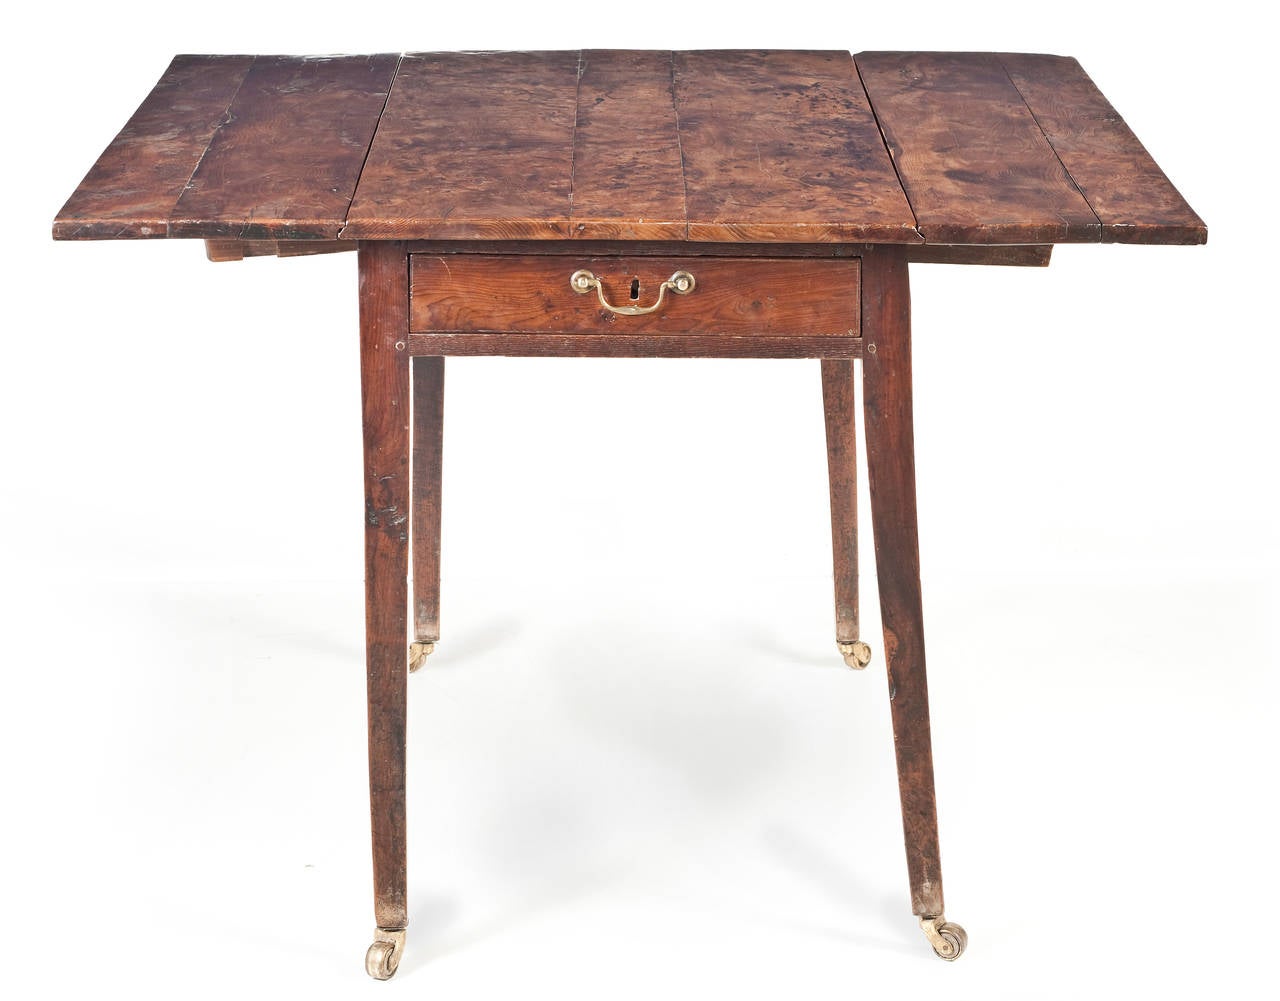 George III Solid Yew Wood Pembroke Table In Excellent Condition For Sale In Malvern, Victoria